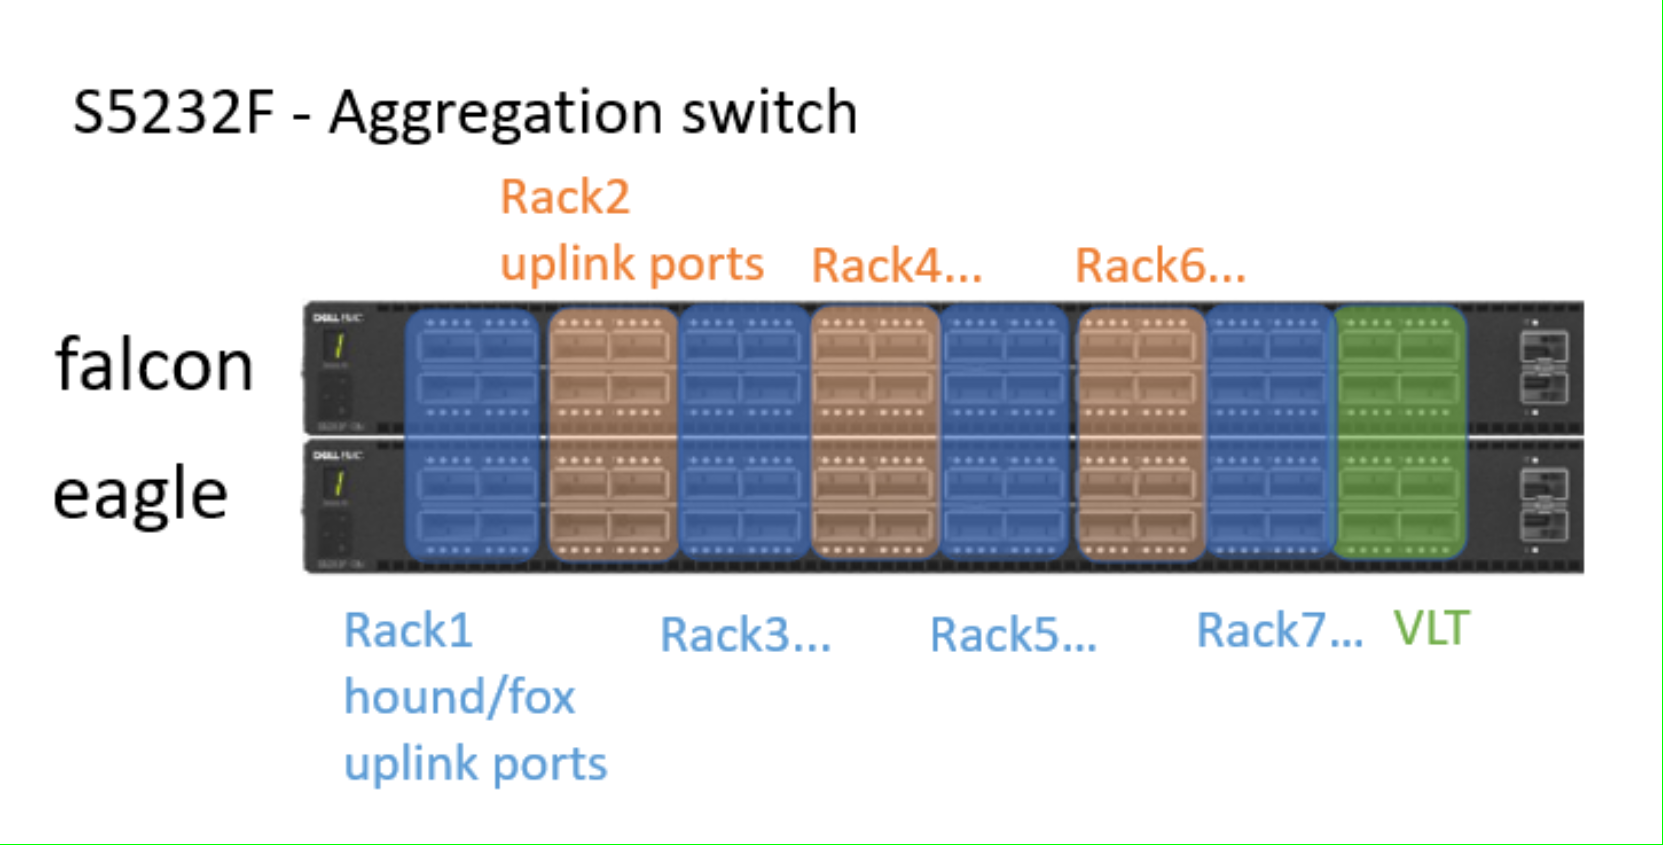 This is aggregation swtich network switch port designation and usage, This configuration allows you to connect to seven racks of EXF900 nodes.